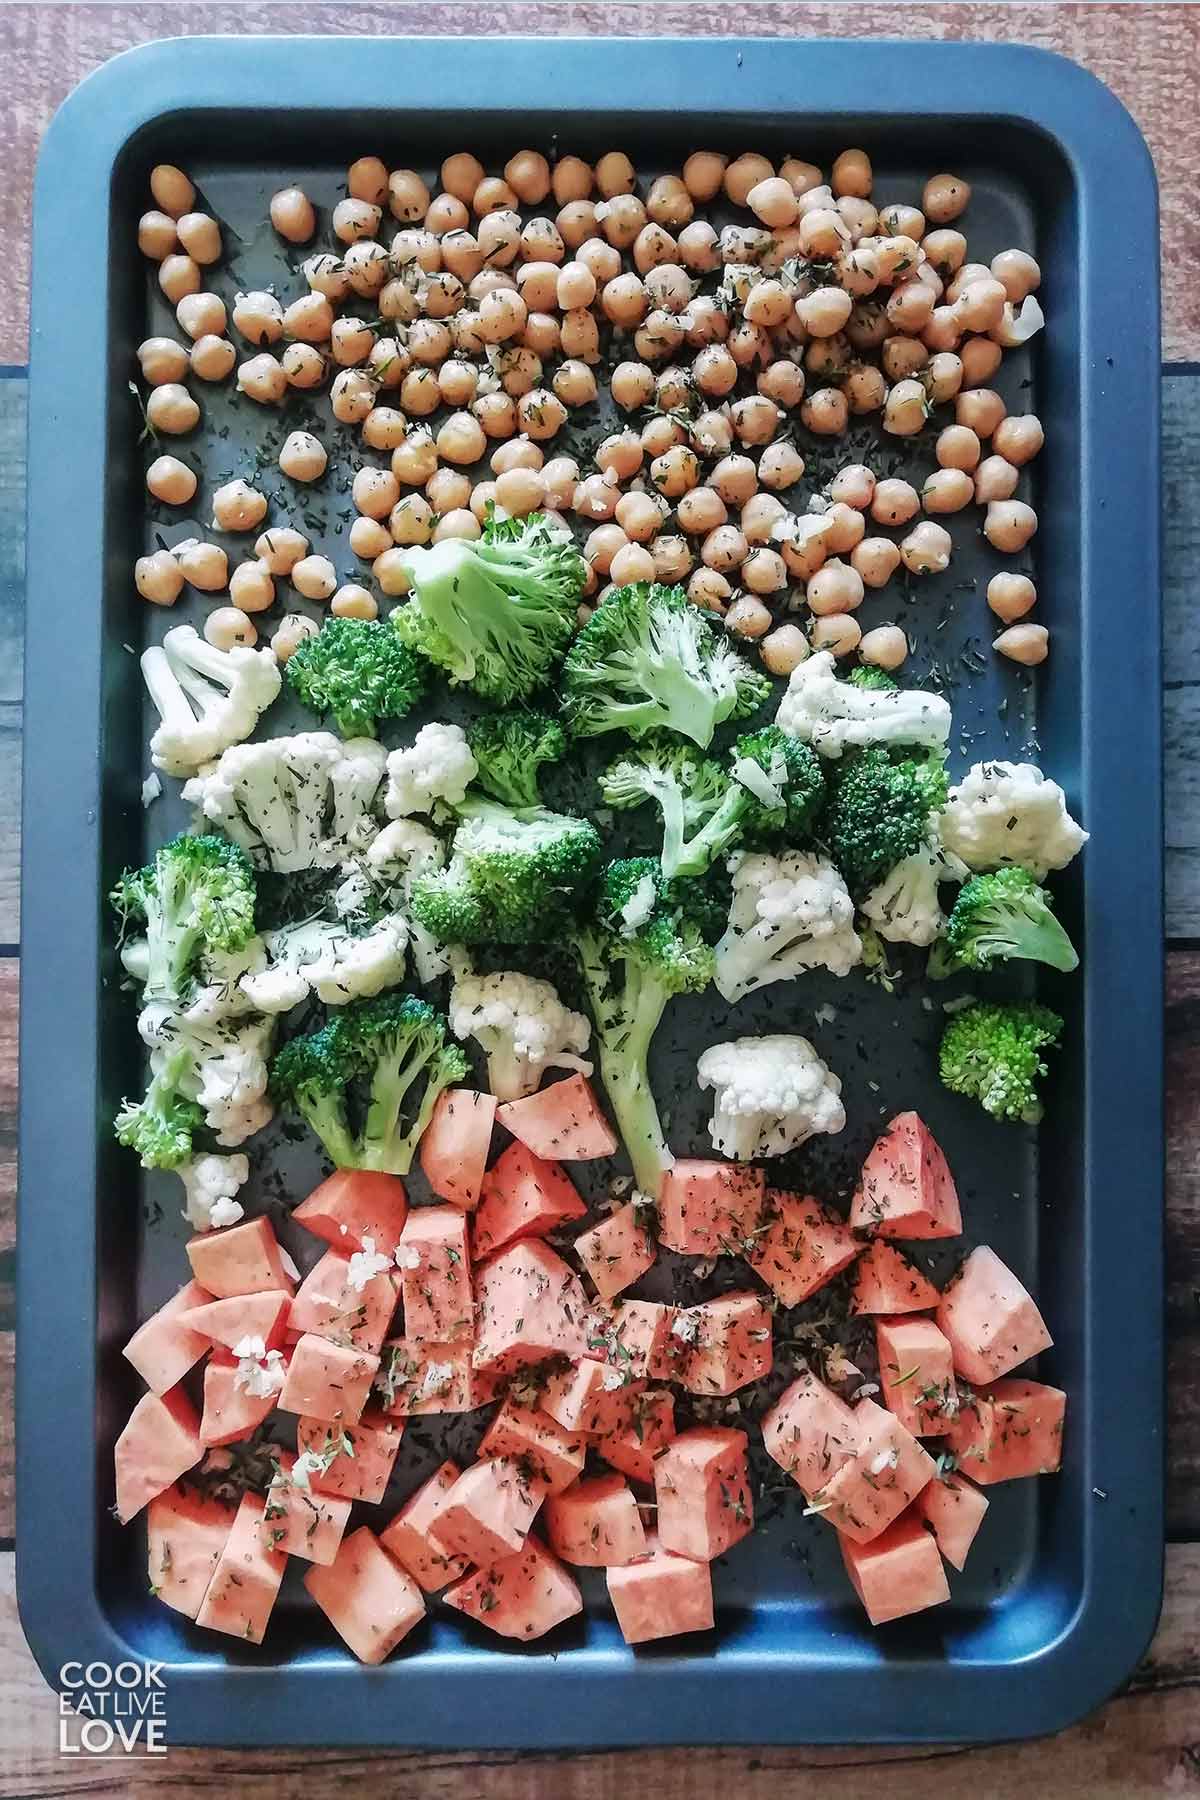 Baking sheet pan with meal prep veggies including chickpeas, broccoli and cauliflower and sweet potatoes.  